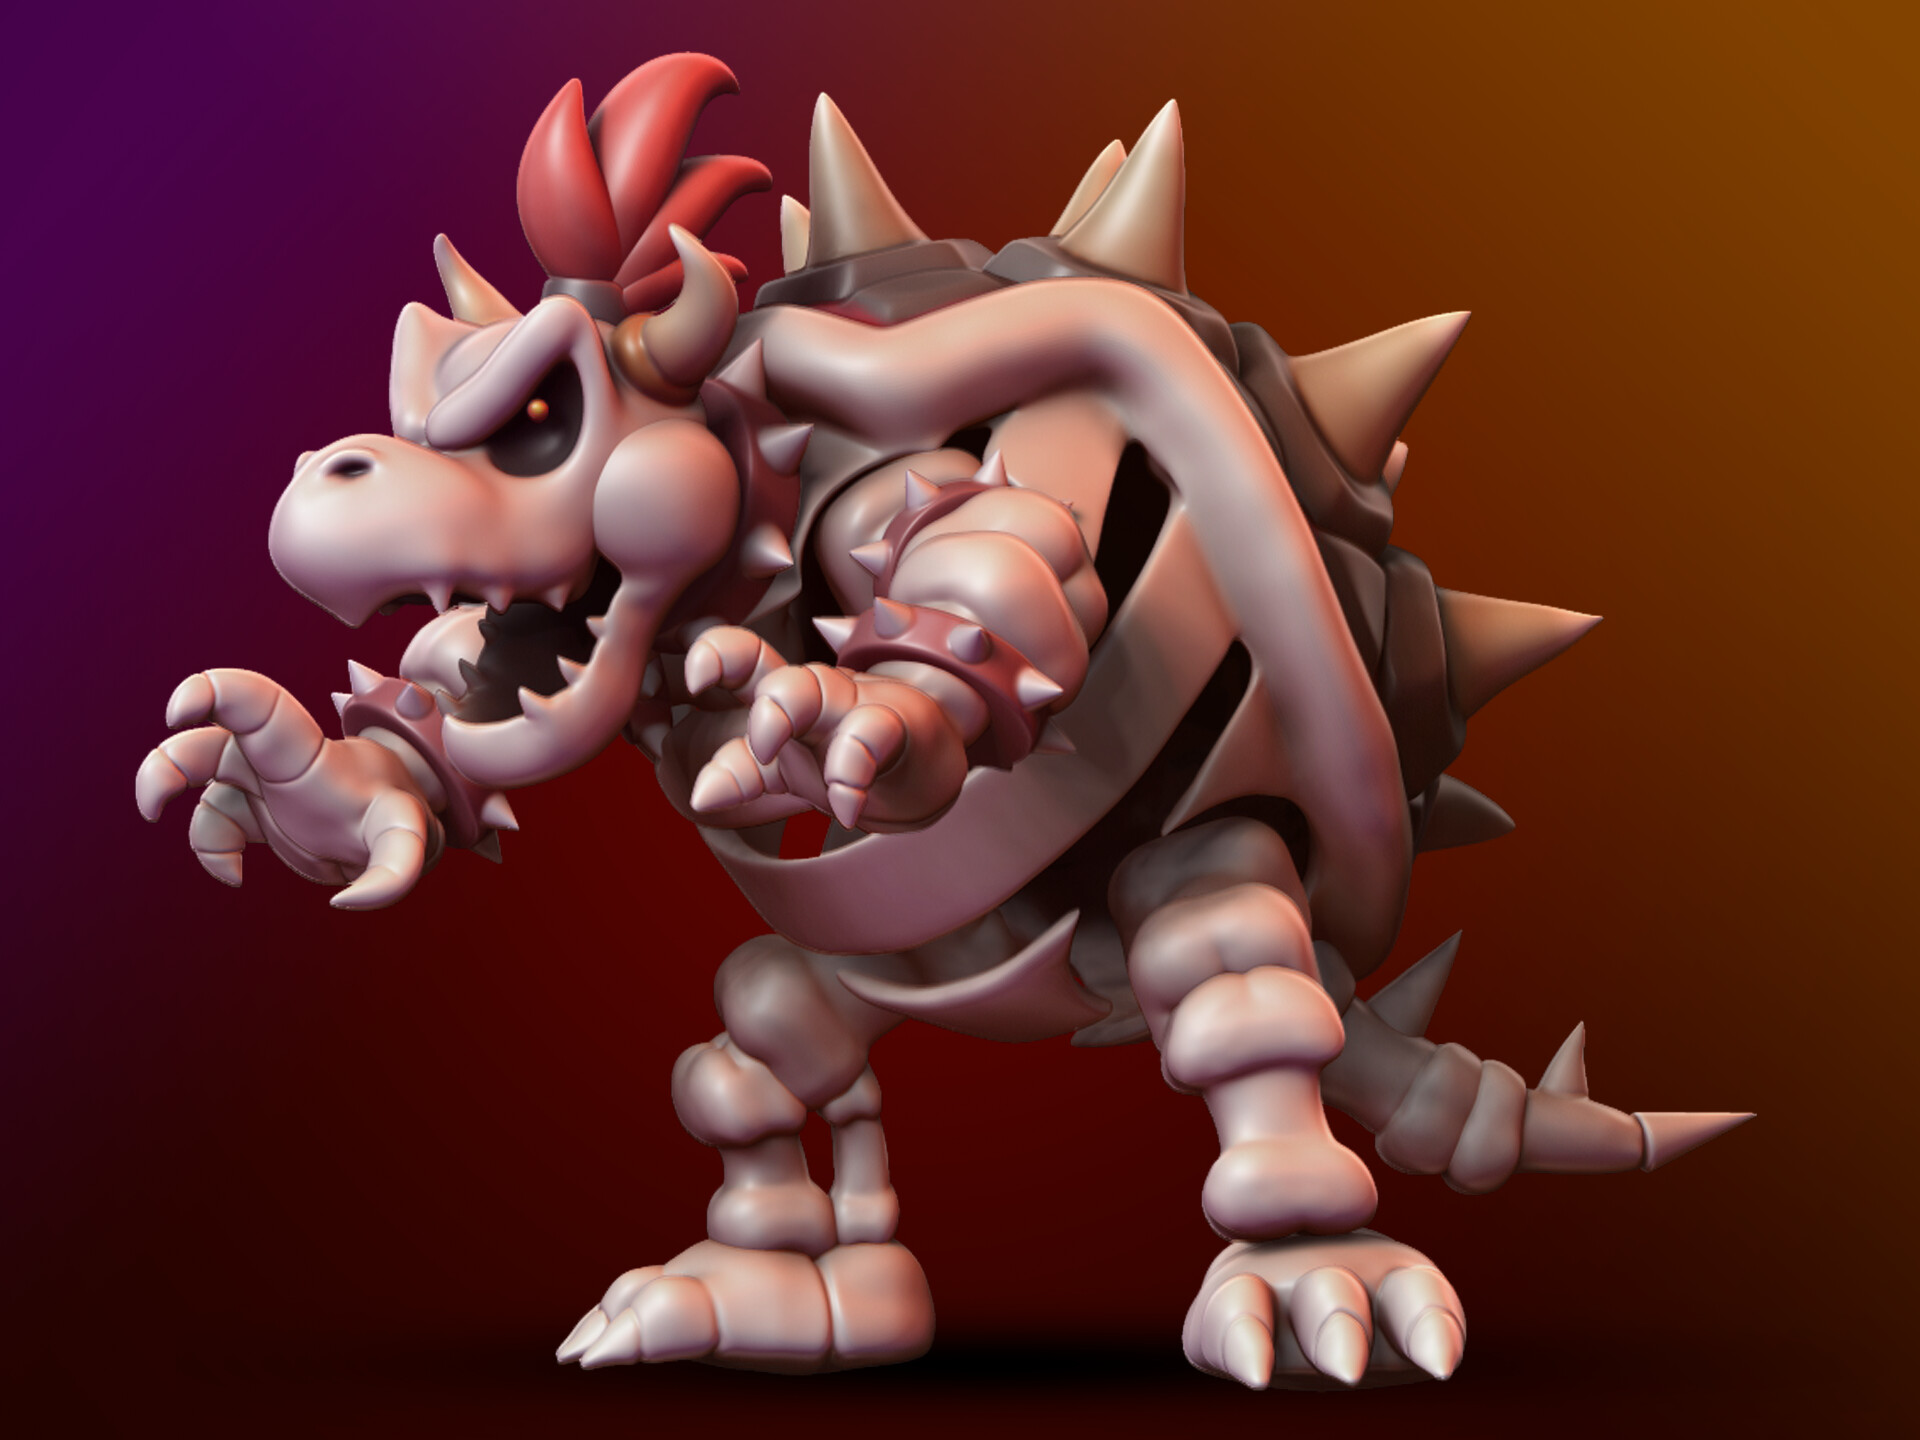 Bowser from Super Mario Bros.